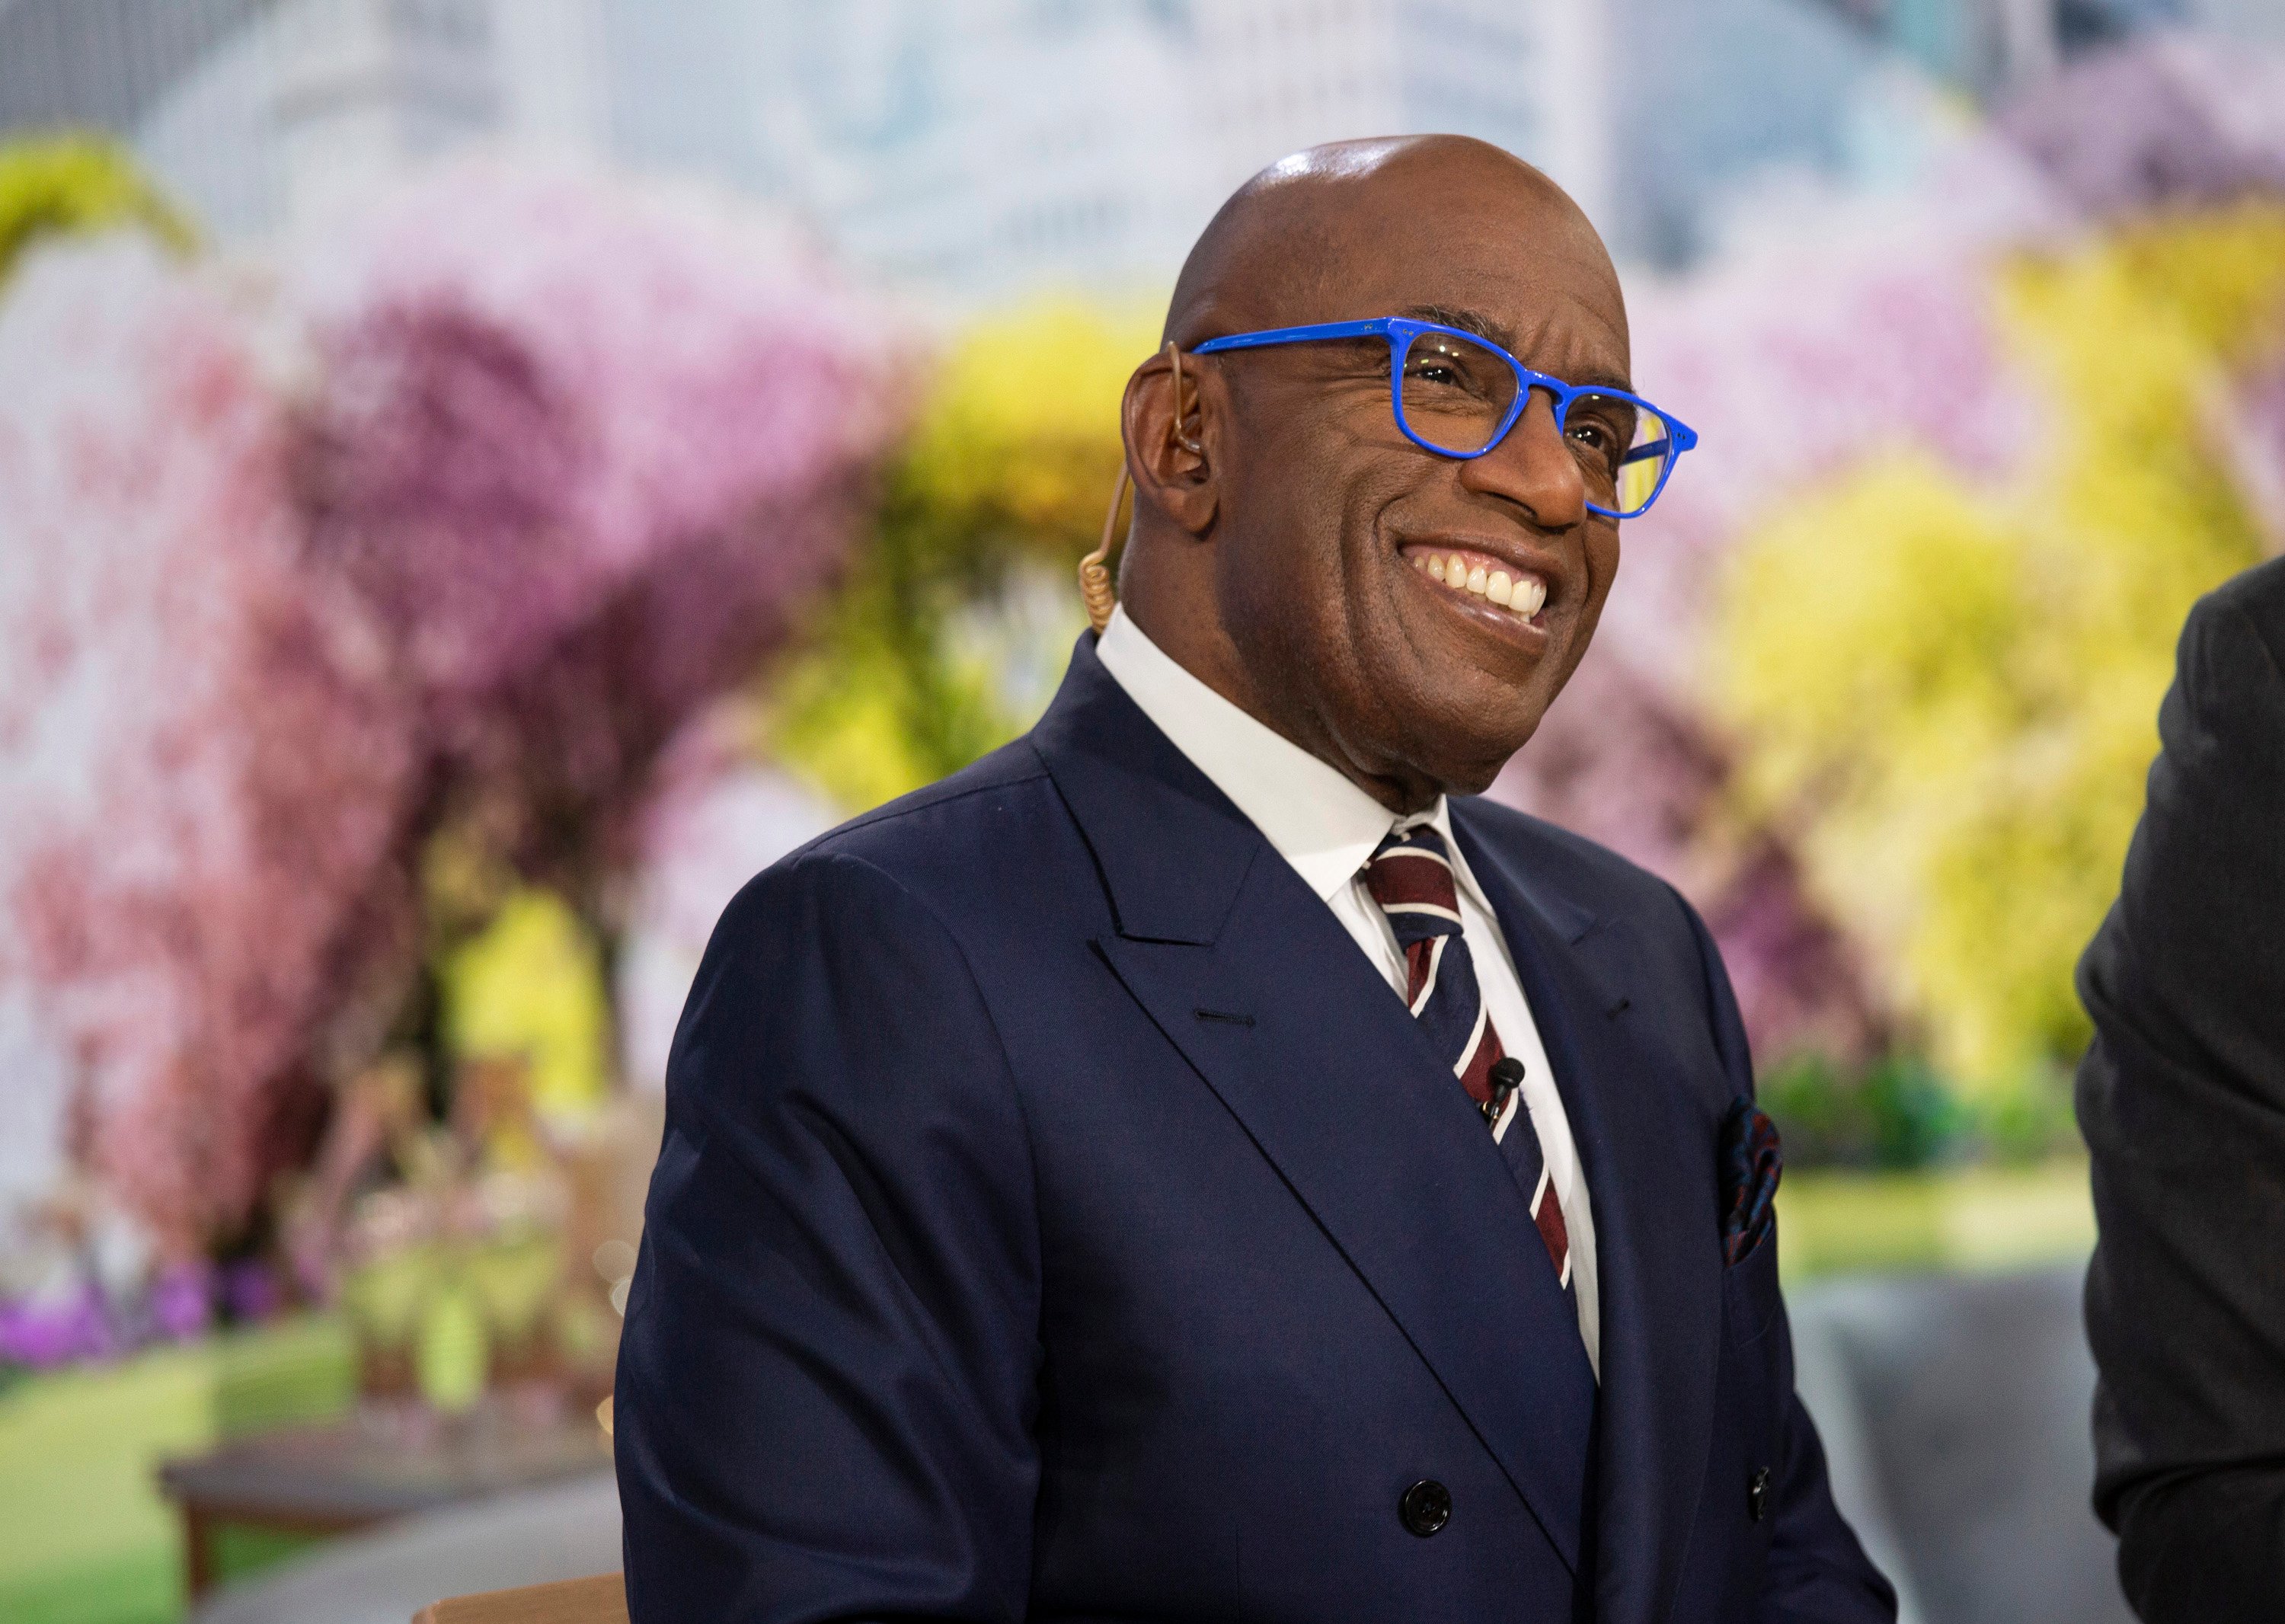 Al Roker in a suit and tie, smiling on the 'Today Show' 